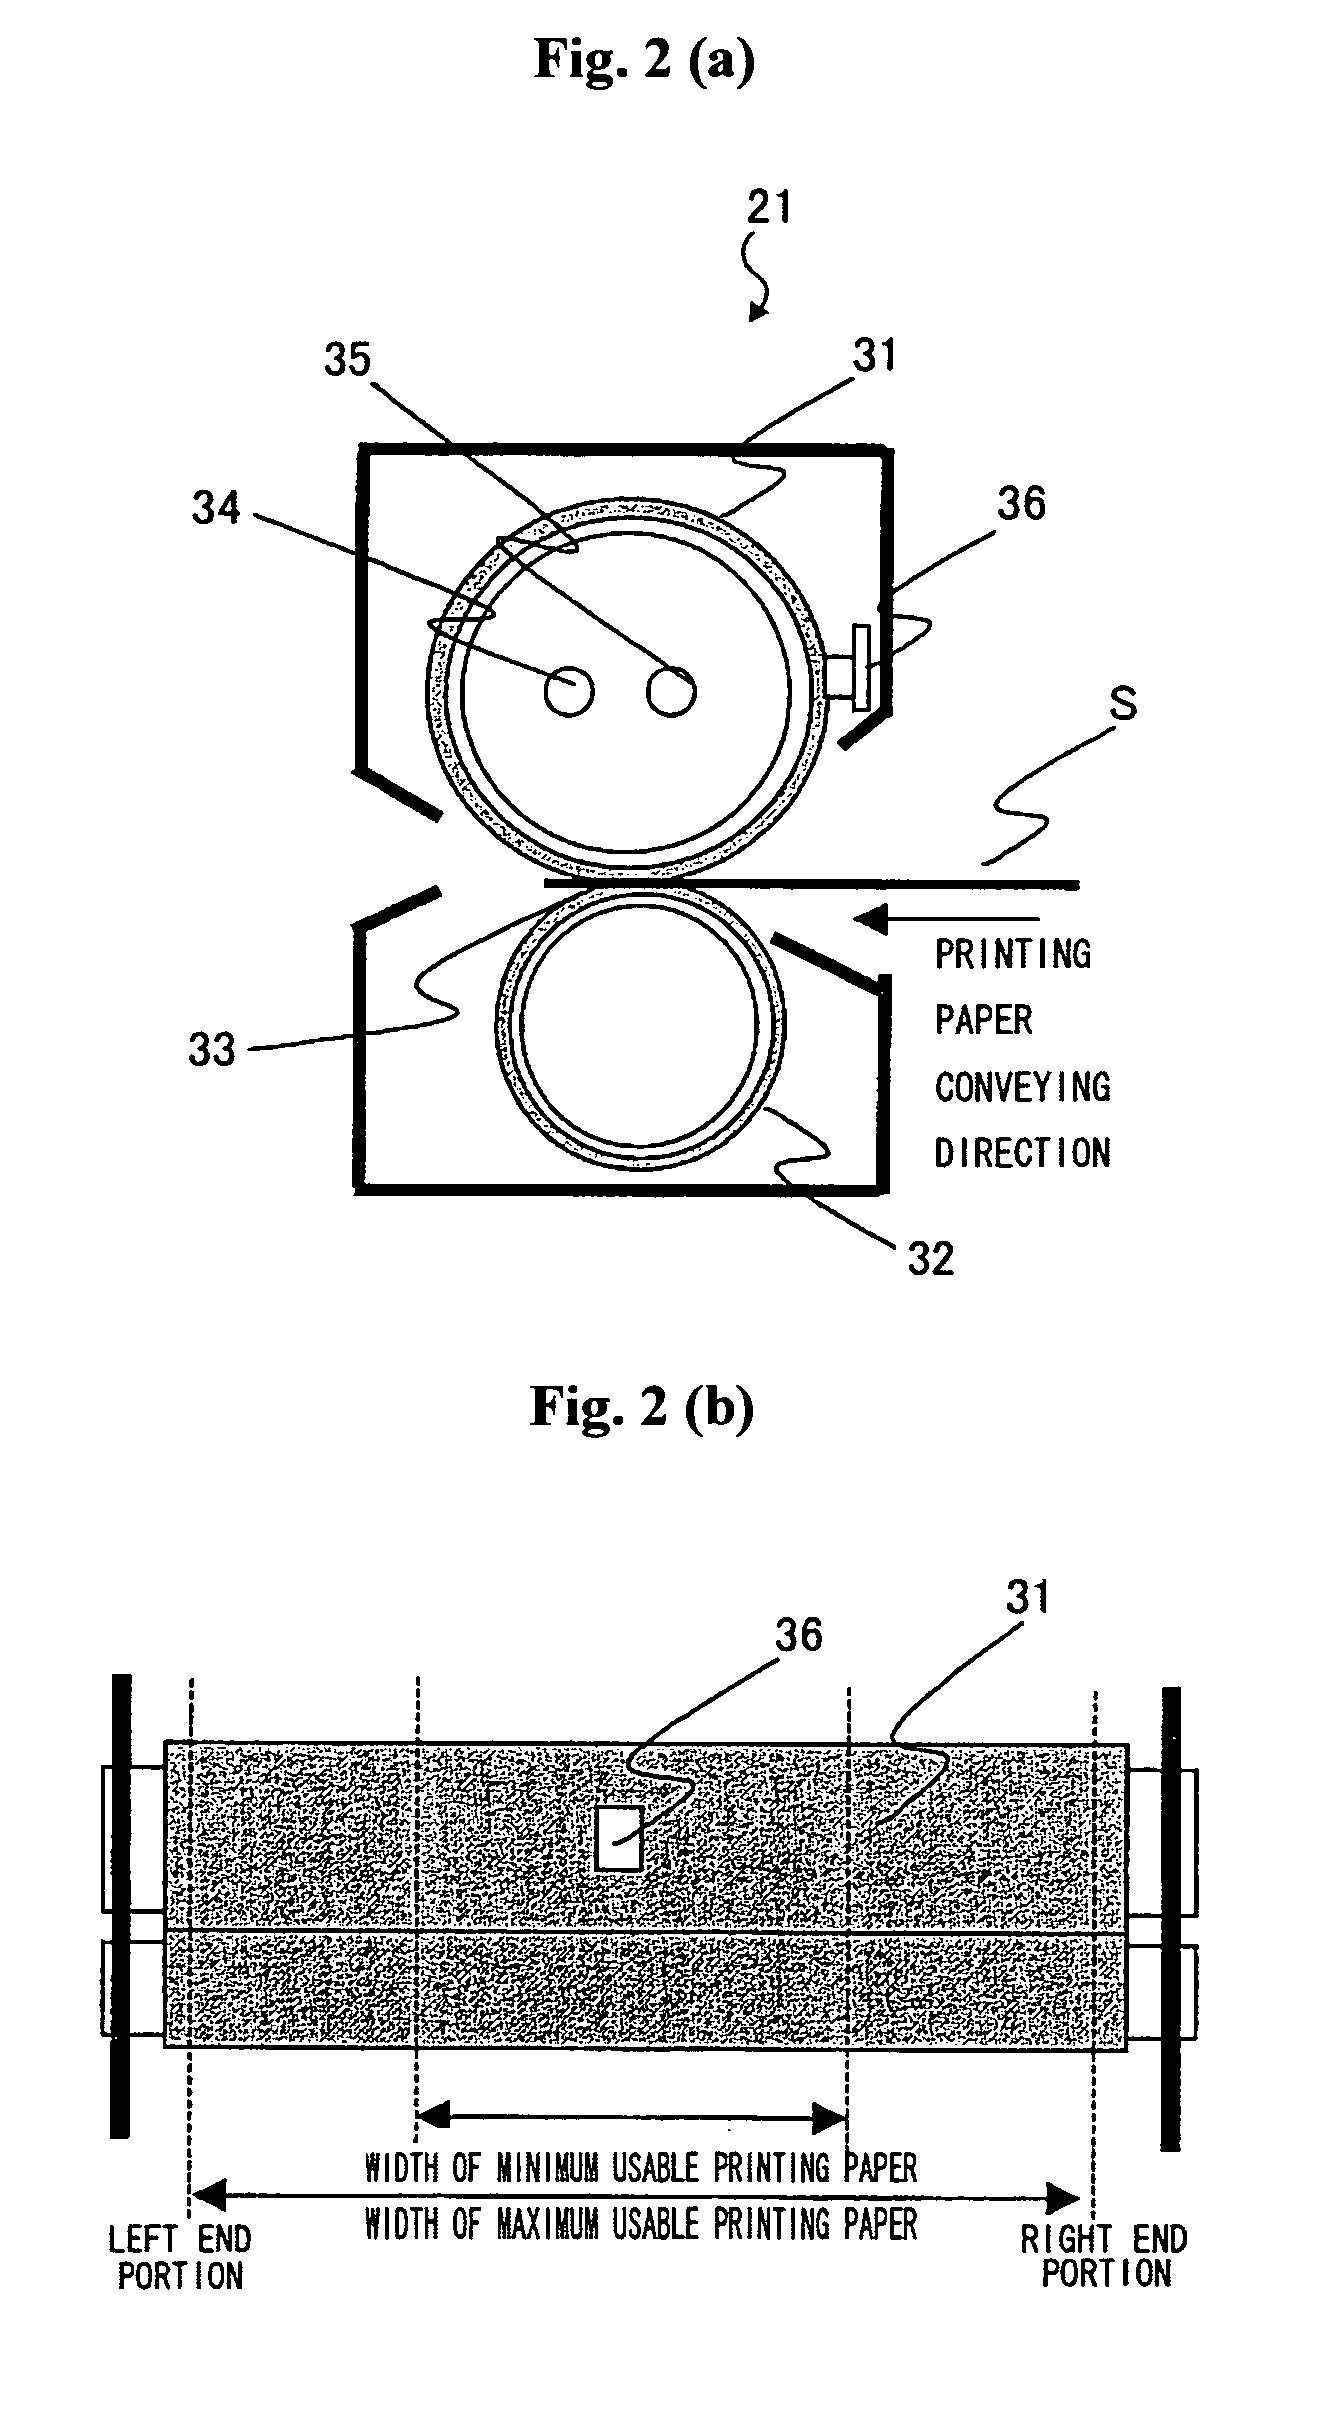 Image recording apparatus including a fusing unit having a plurality of heater members